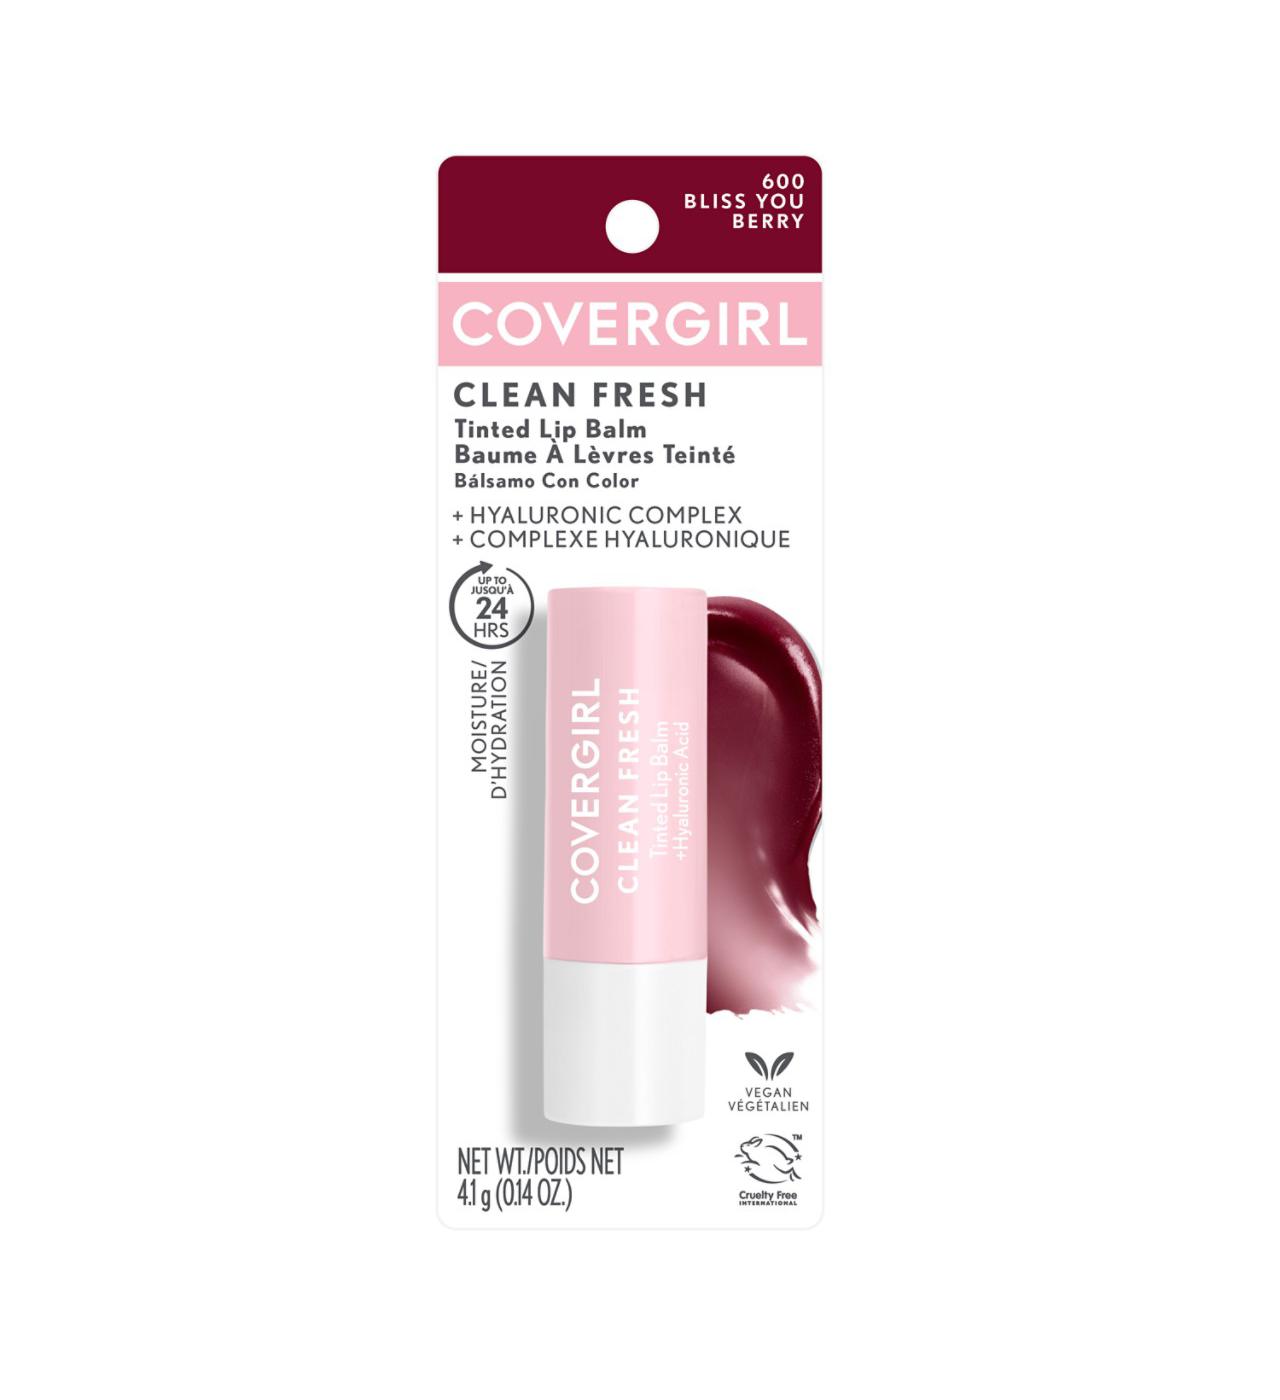 Covergirl Clean Fresh Tinted Lip Balm - Bliss You Berry; image 1 of 2